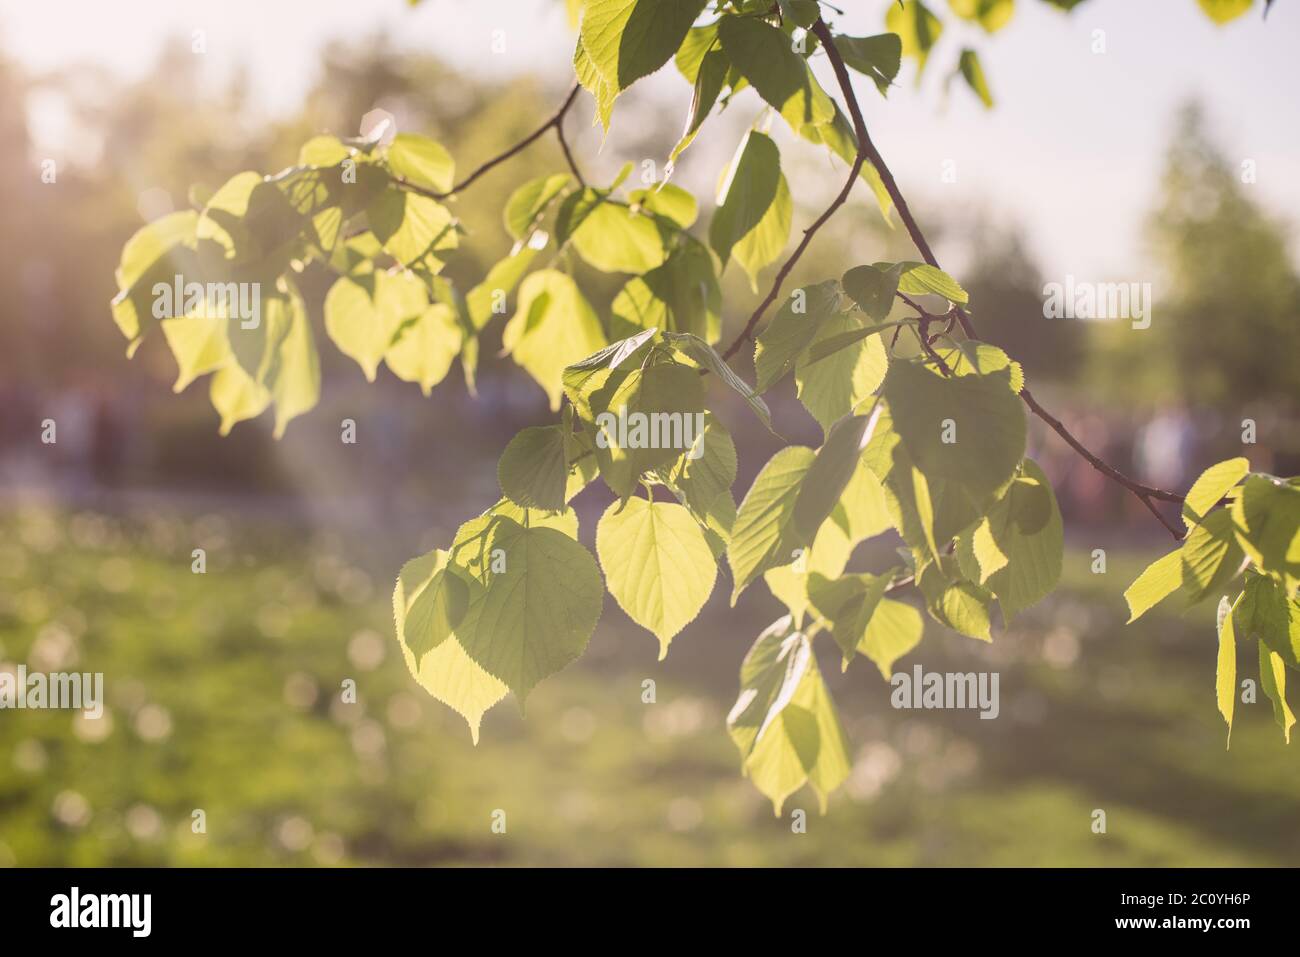 Leaves of linden tree lit  thorough by sun shining through summer. Background Stock Photo